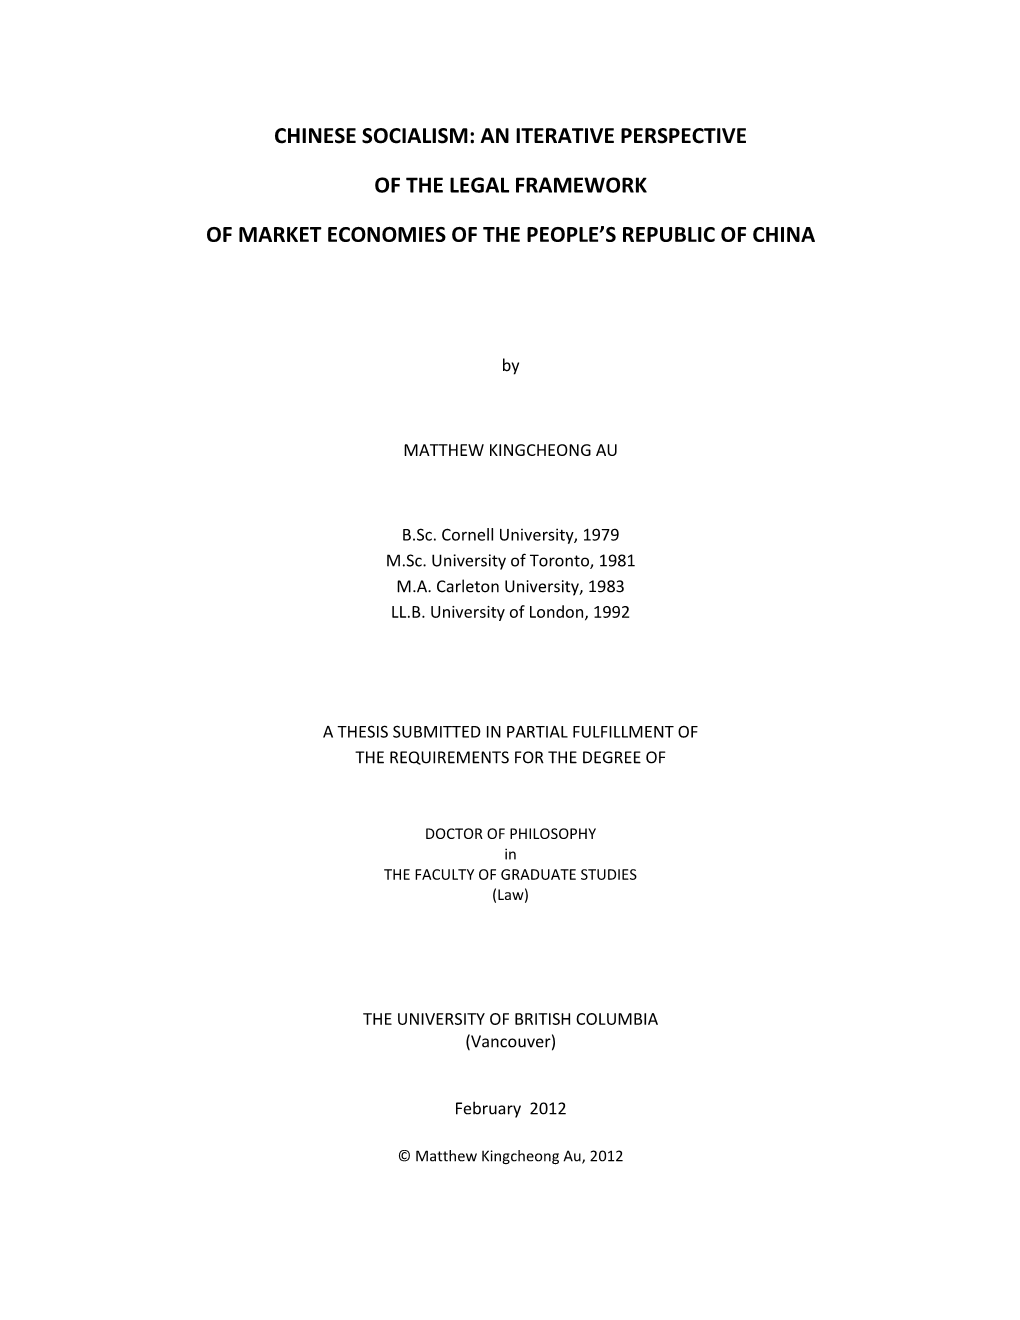 Chinese Socialism: an Iterative Perspective of the Legal Framework